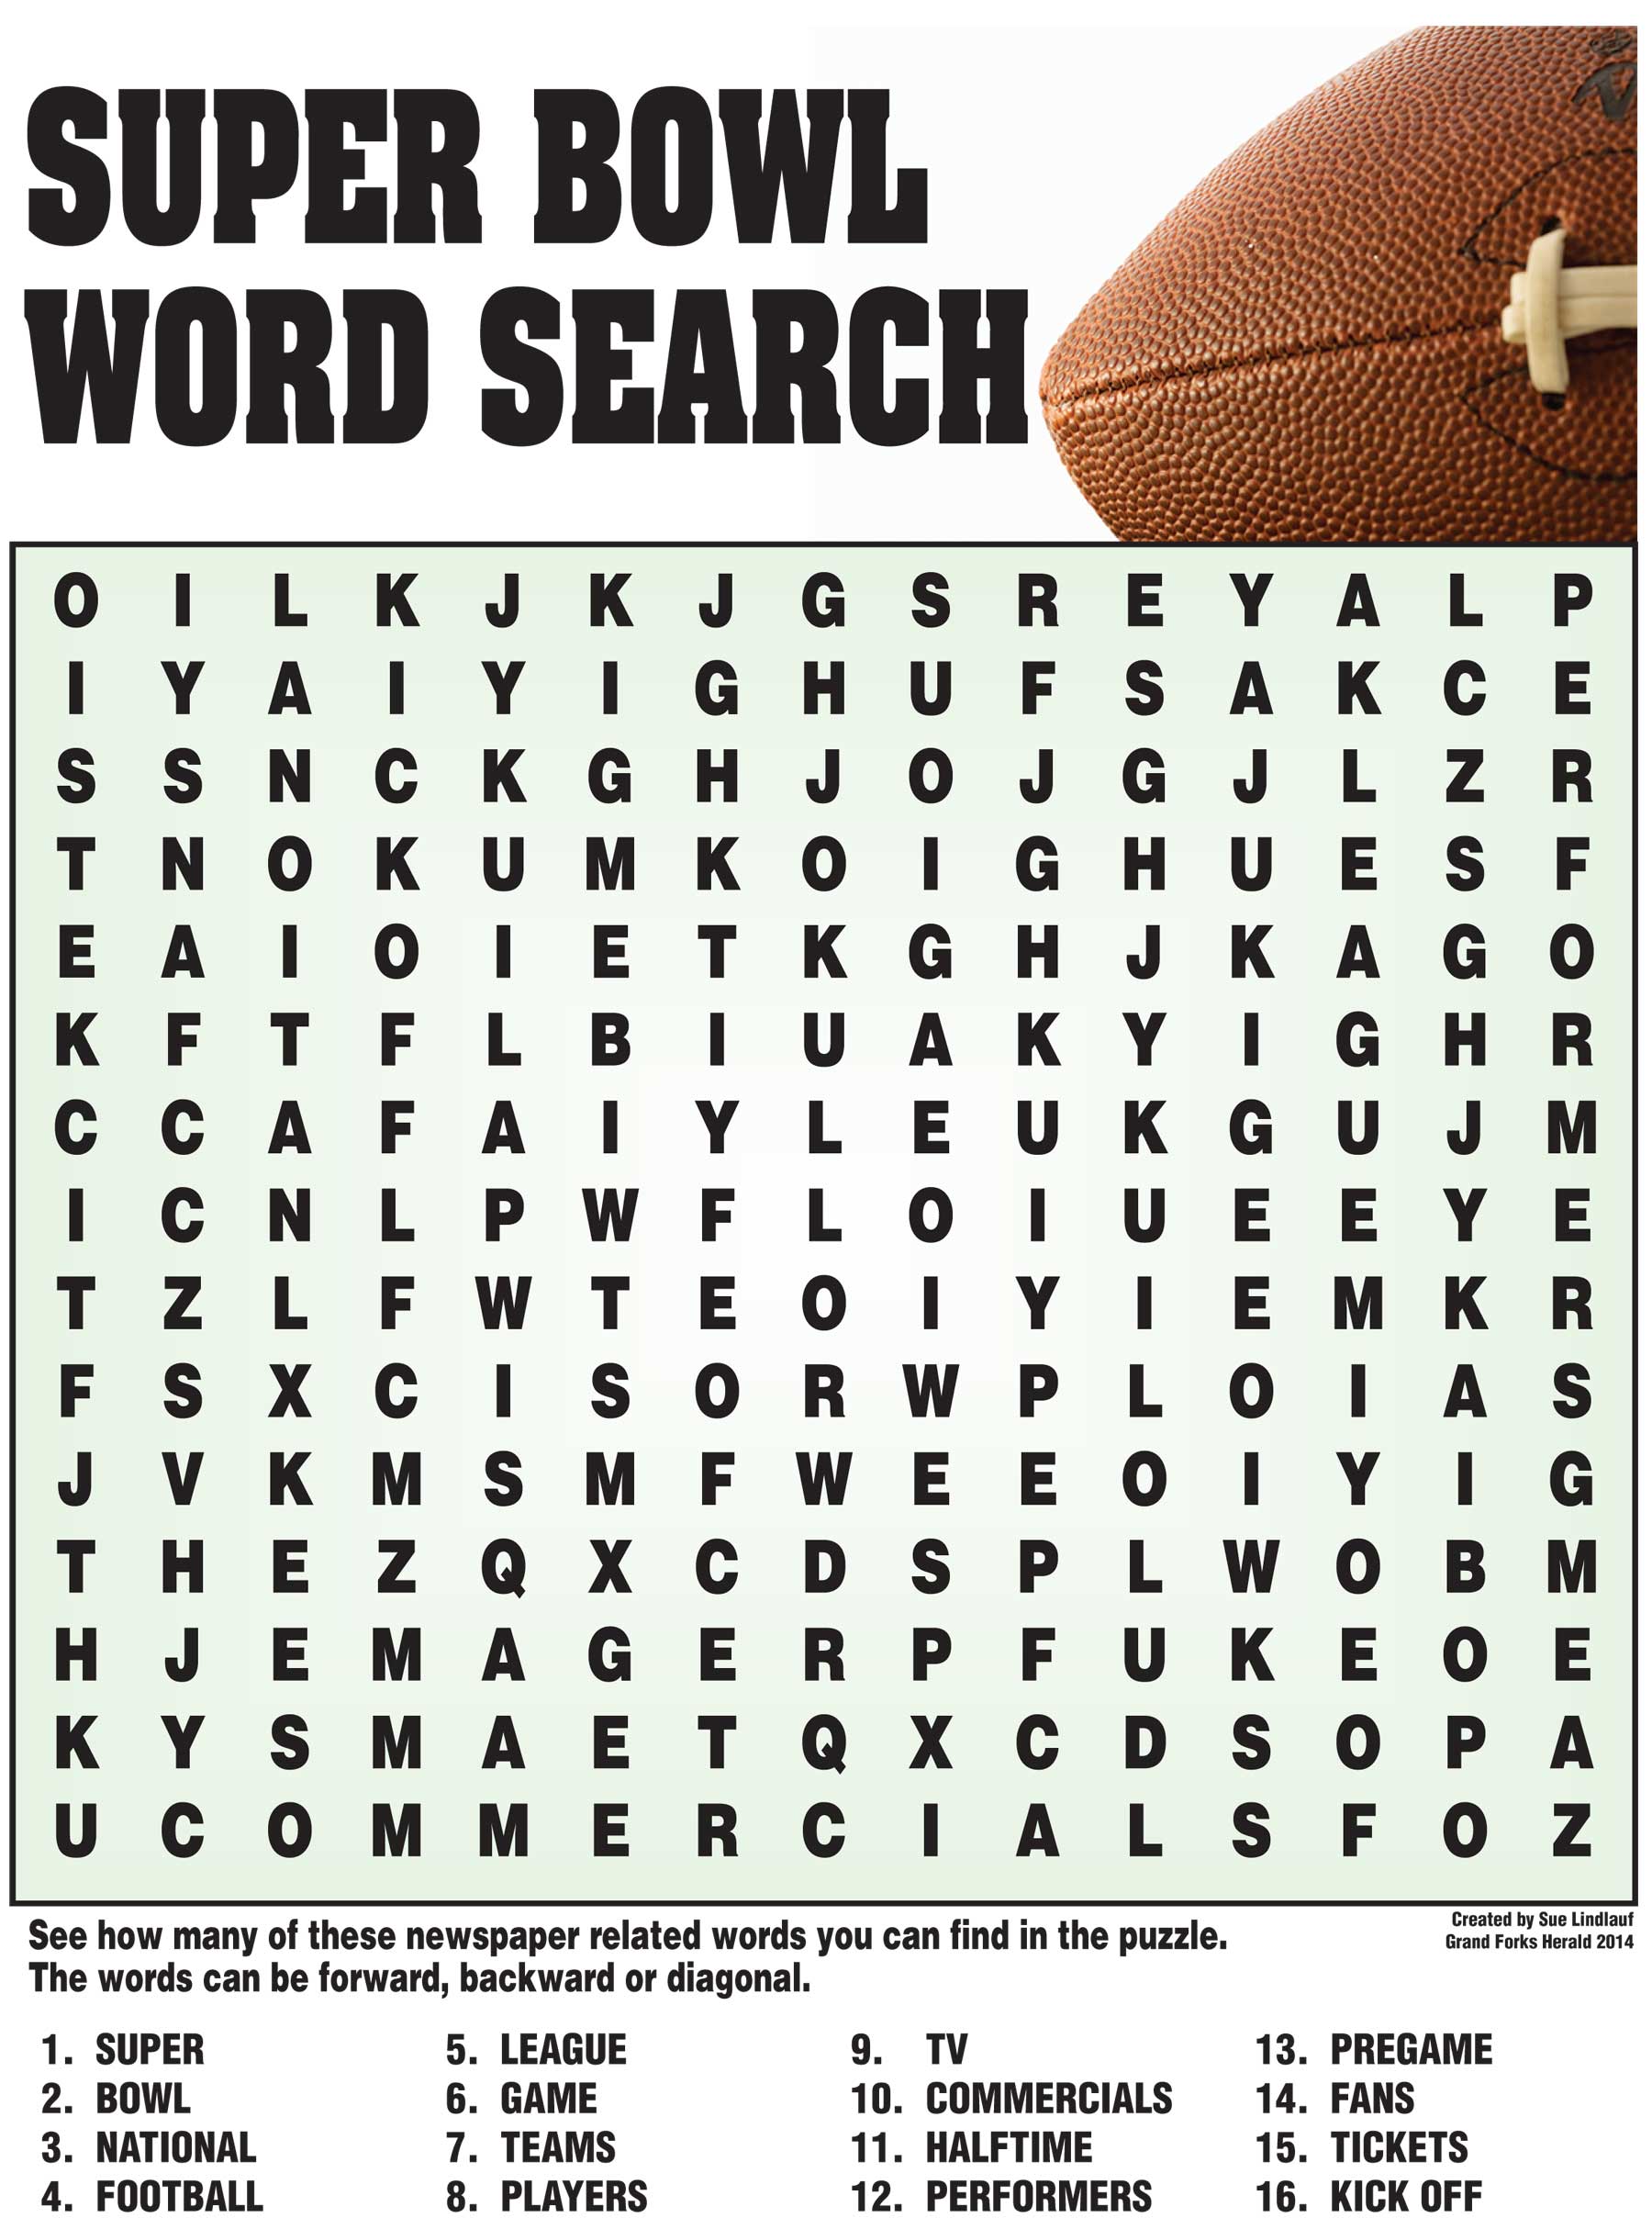 5 Best Images of Super Bowl Printable Puzzles Super Bowl Word Search